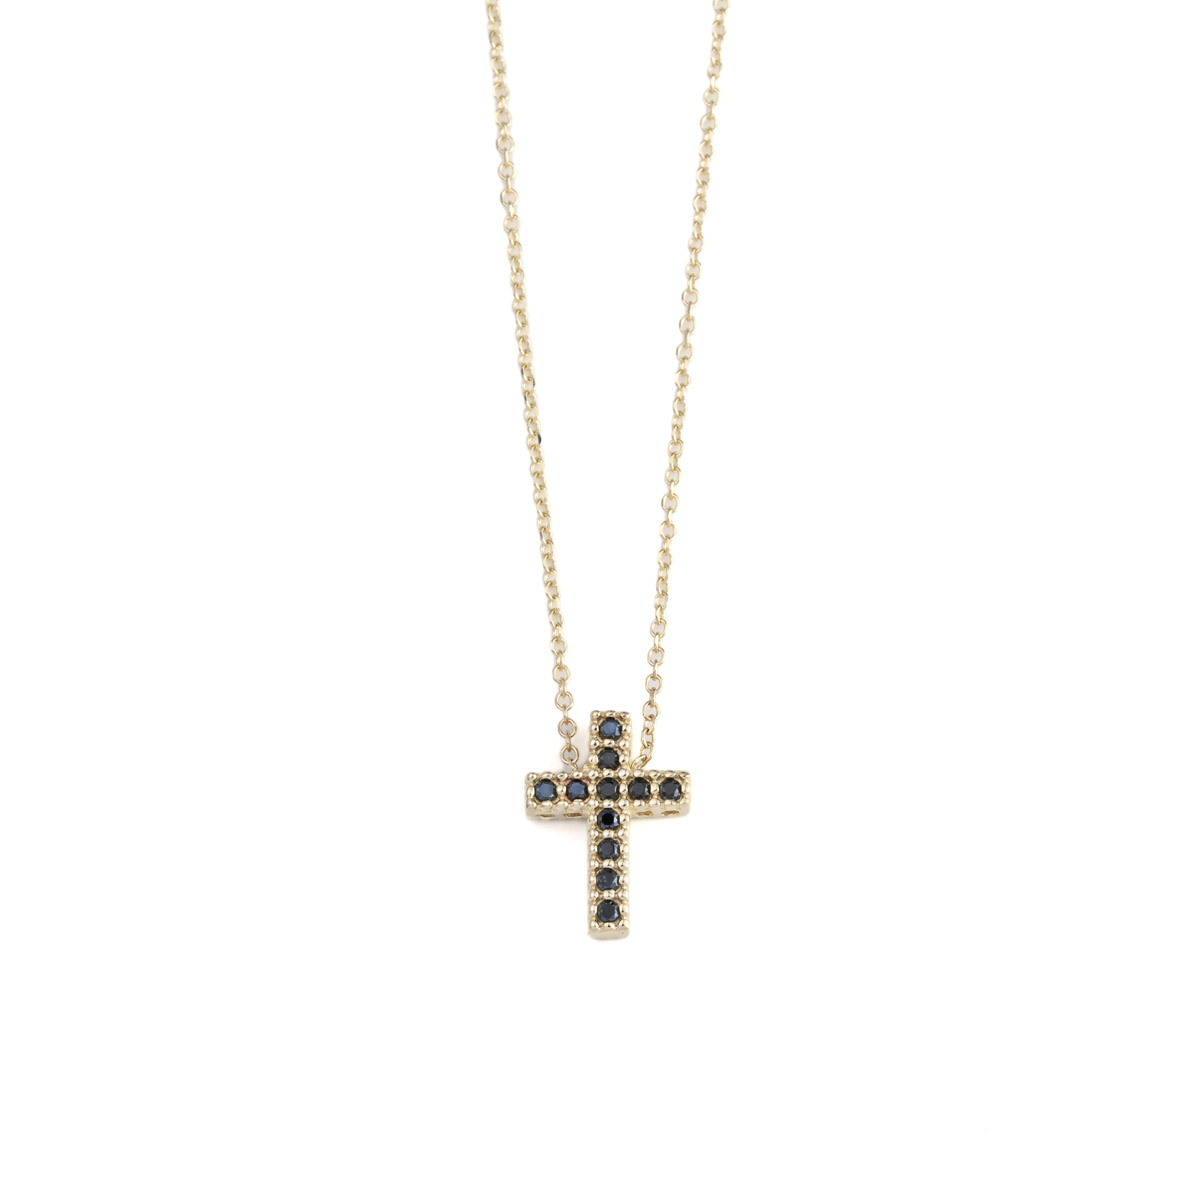 Two Sided Zircon Cross Necklace - 9K Gold